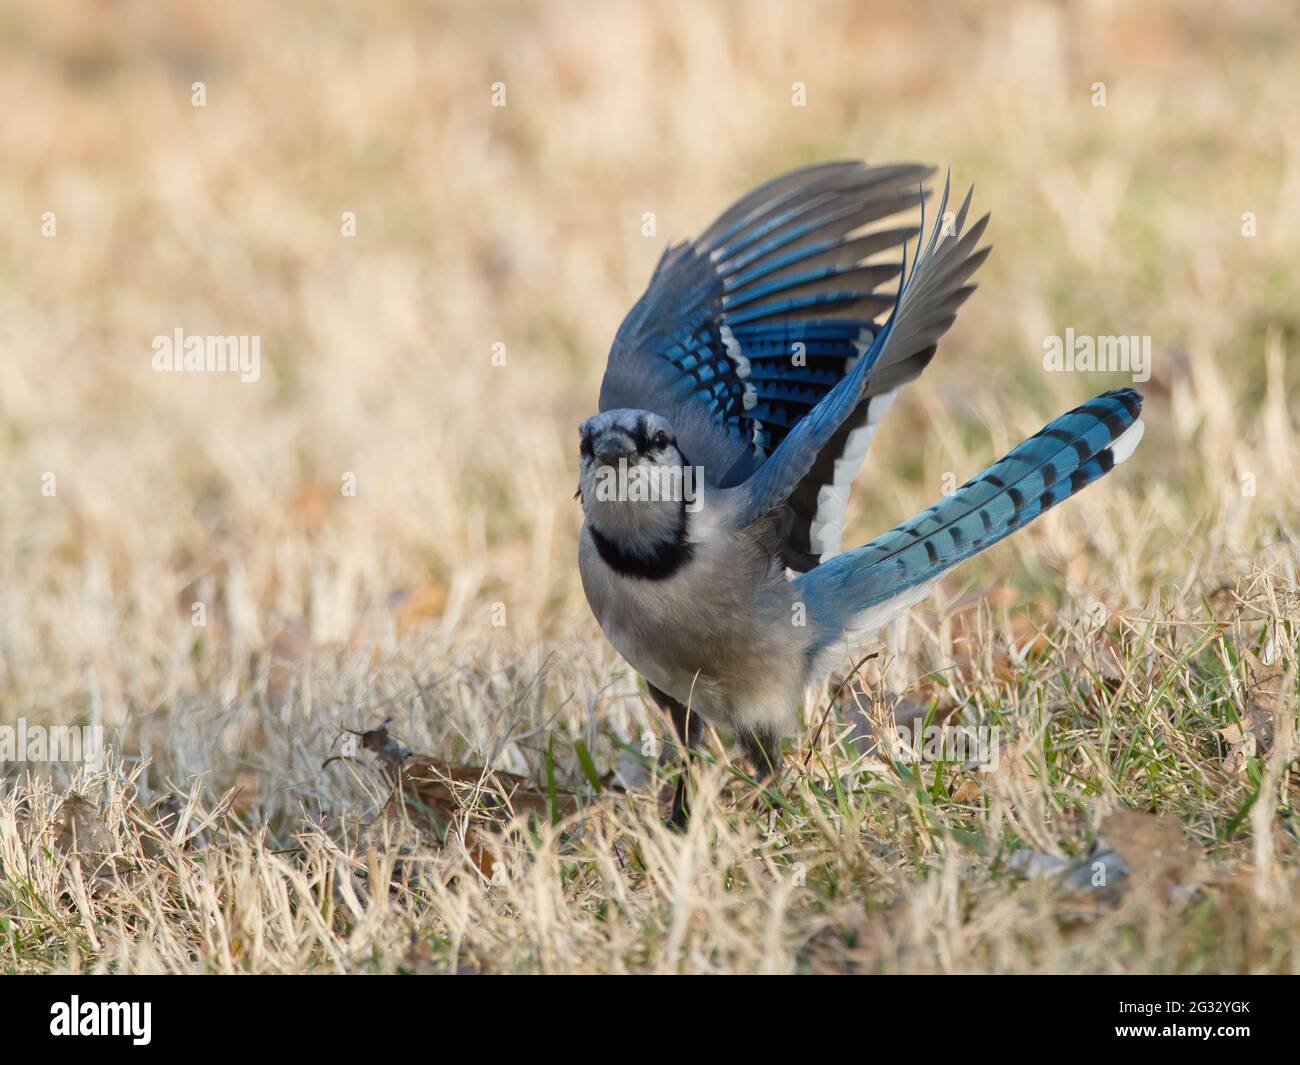 A beautiful Blue Jay bird with open wings Stock Photo